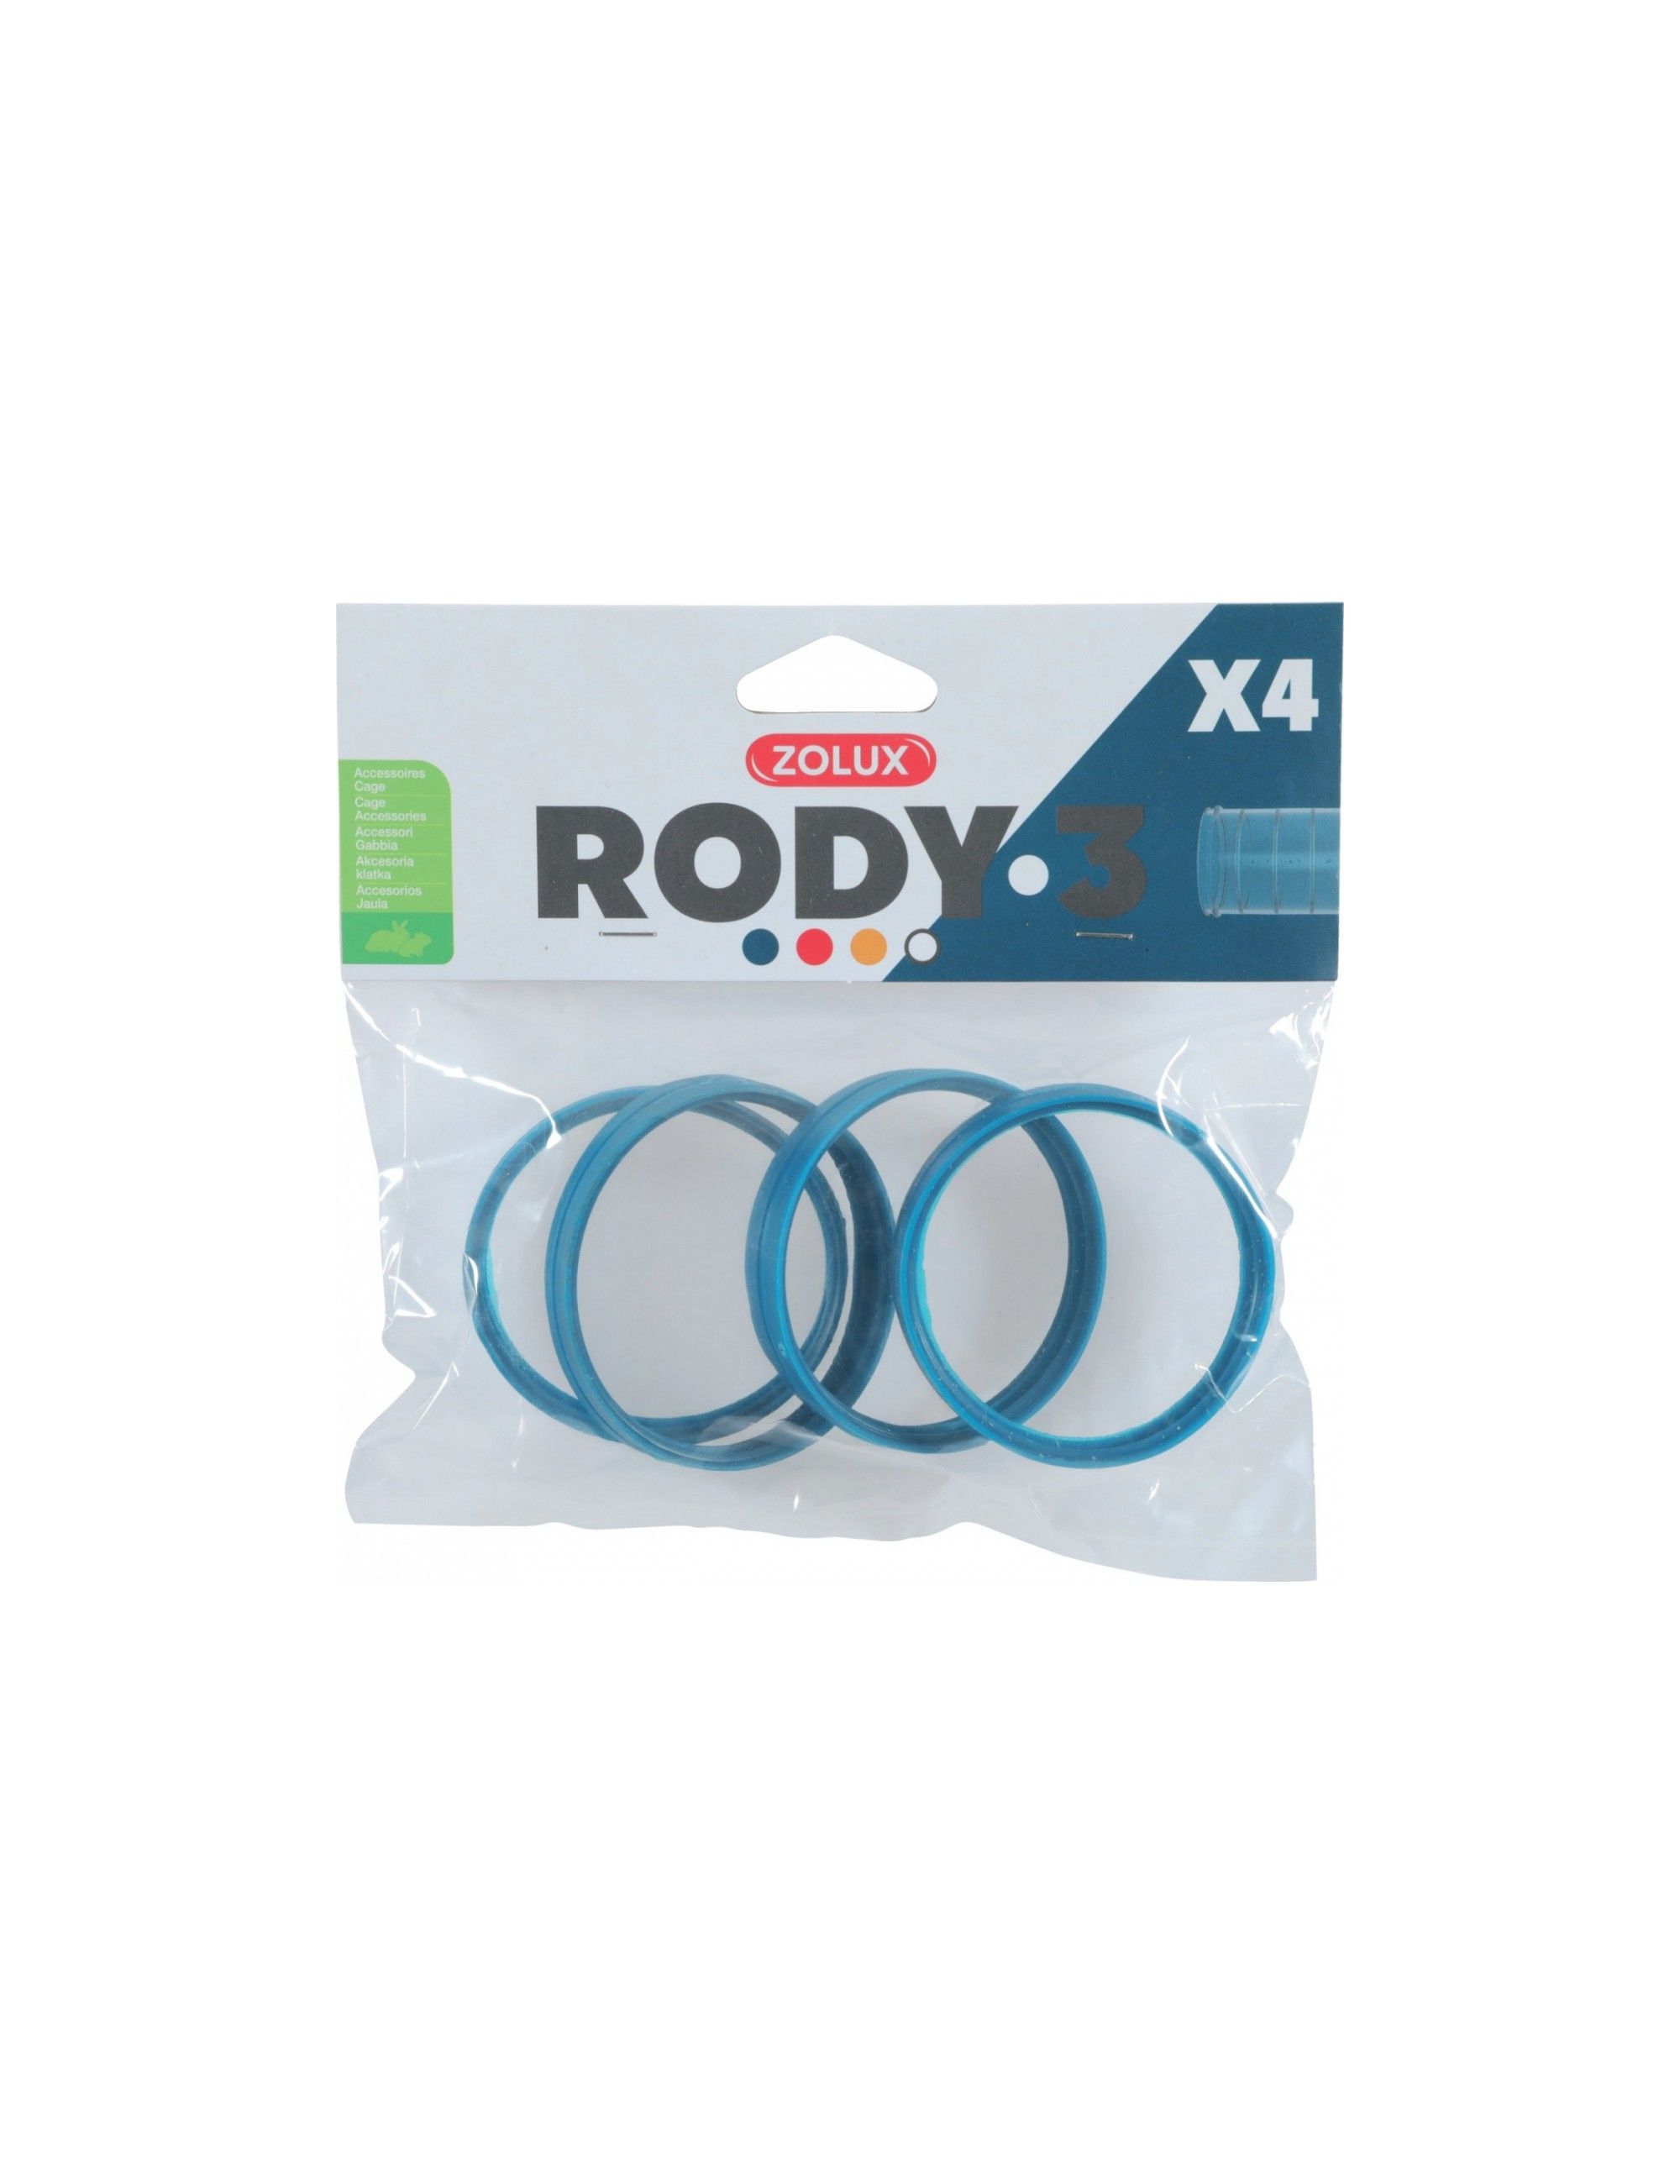 ZOLUX - Pack of 4 Rody Extension Connection Rings